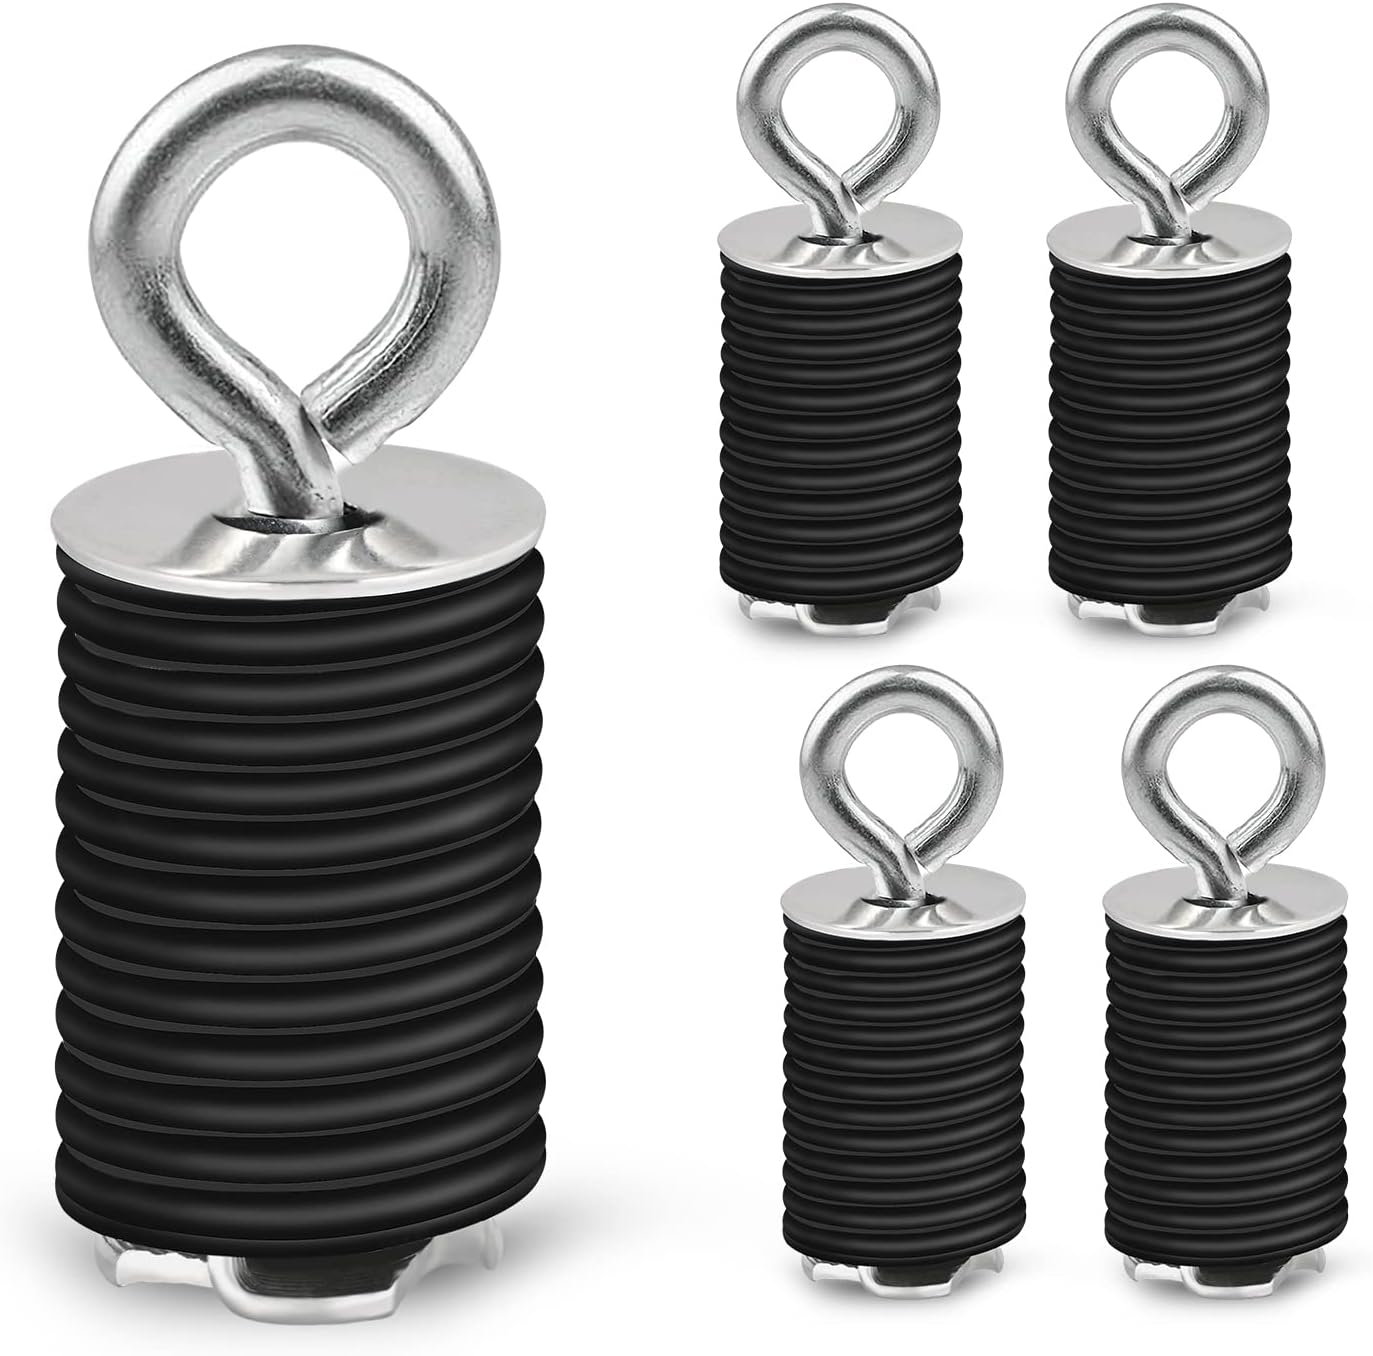 Tie Down Anchors Compatible with Polaris RZR 900 1000 XP Turbo Sportsman 450 570 850 ACE 500 570 EPS 900 XC -DO NOT FIT Ranger and General(Set of 5)